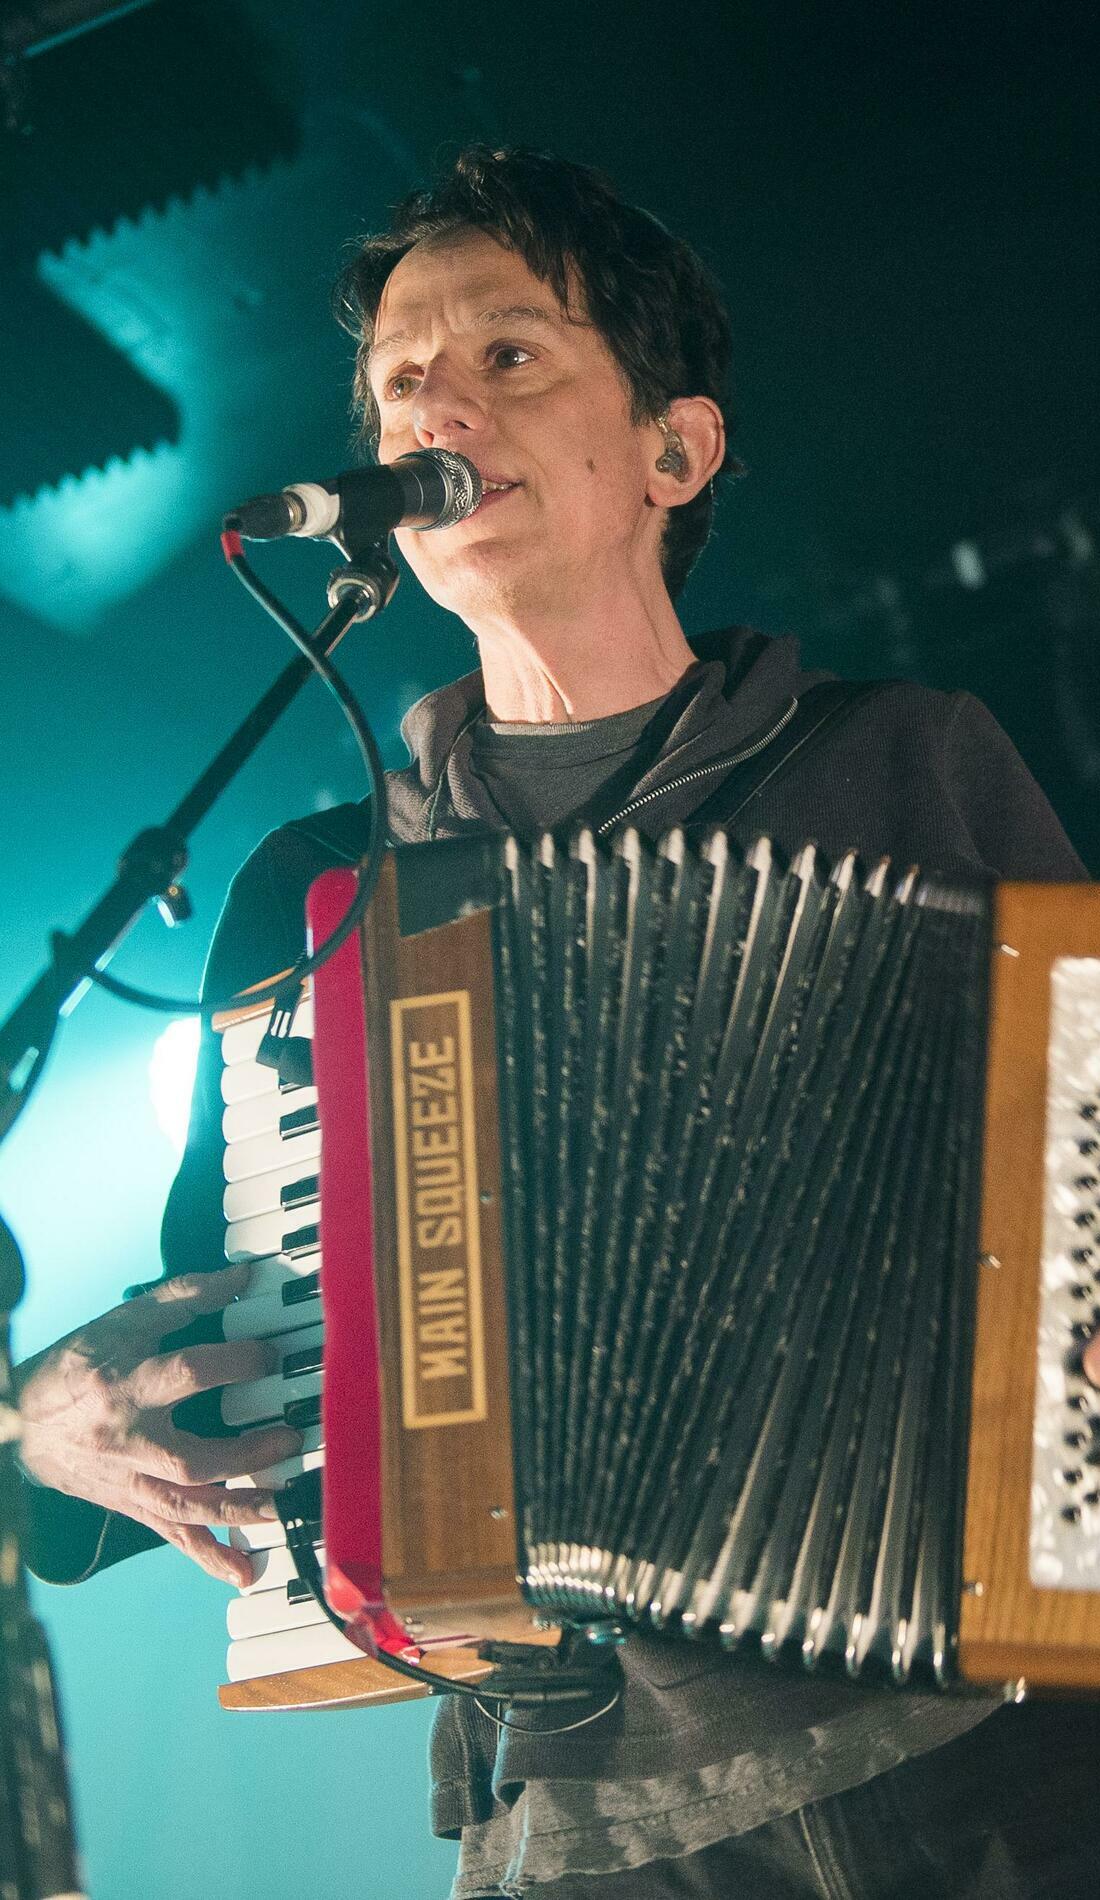 A They Might Be Giants live event